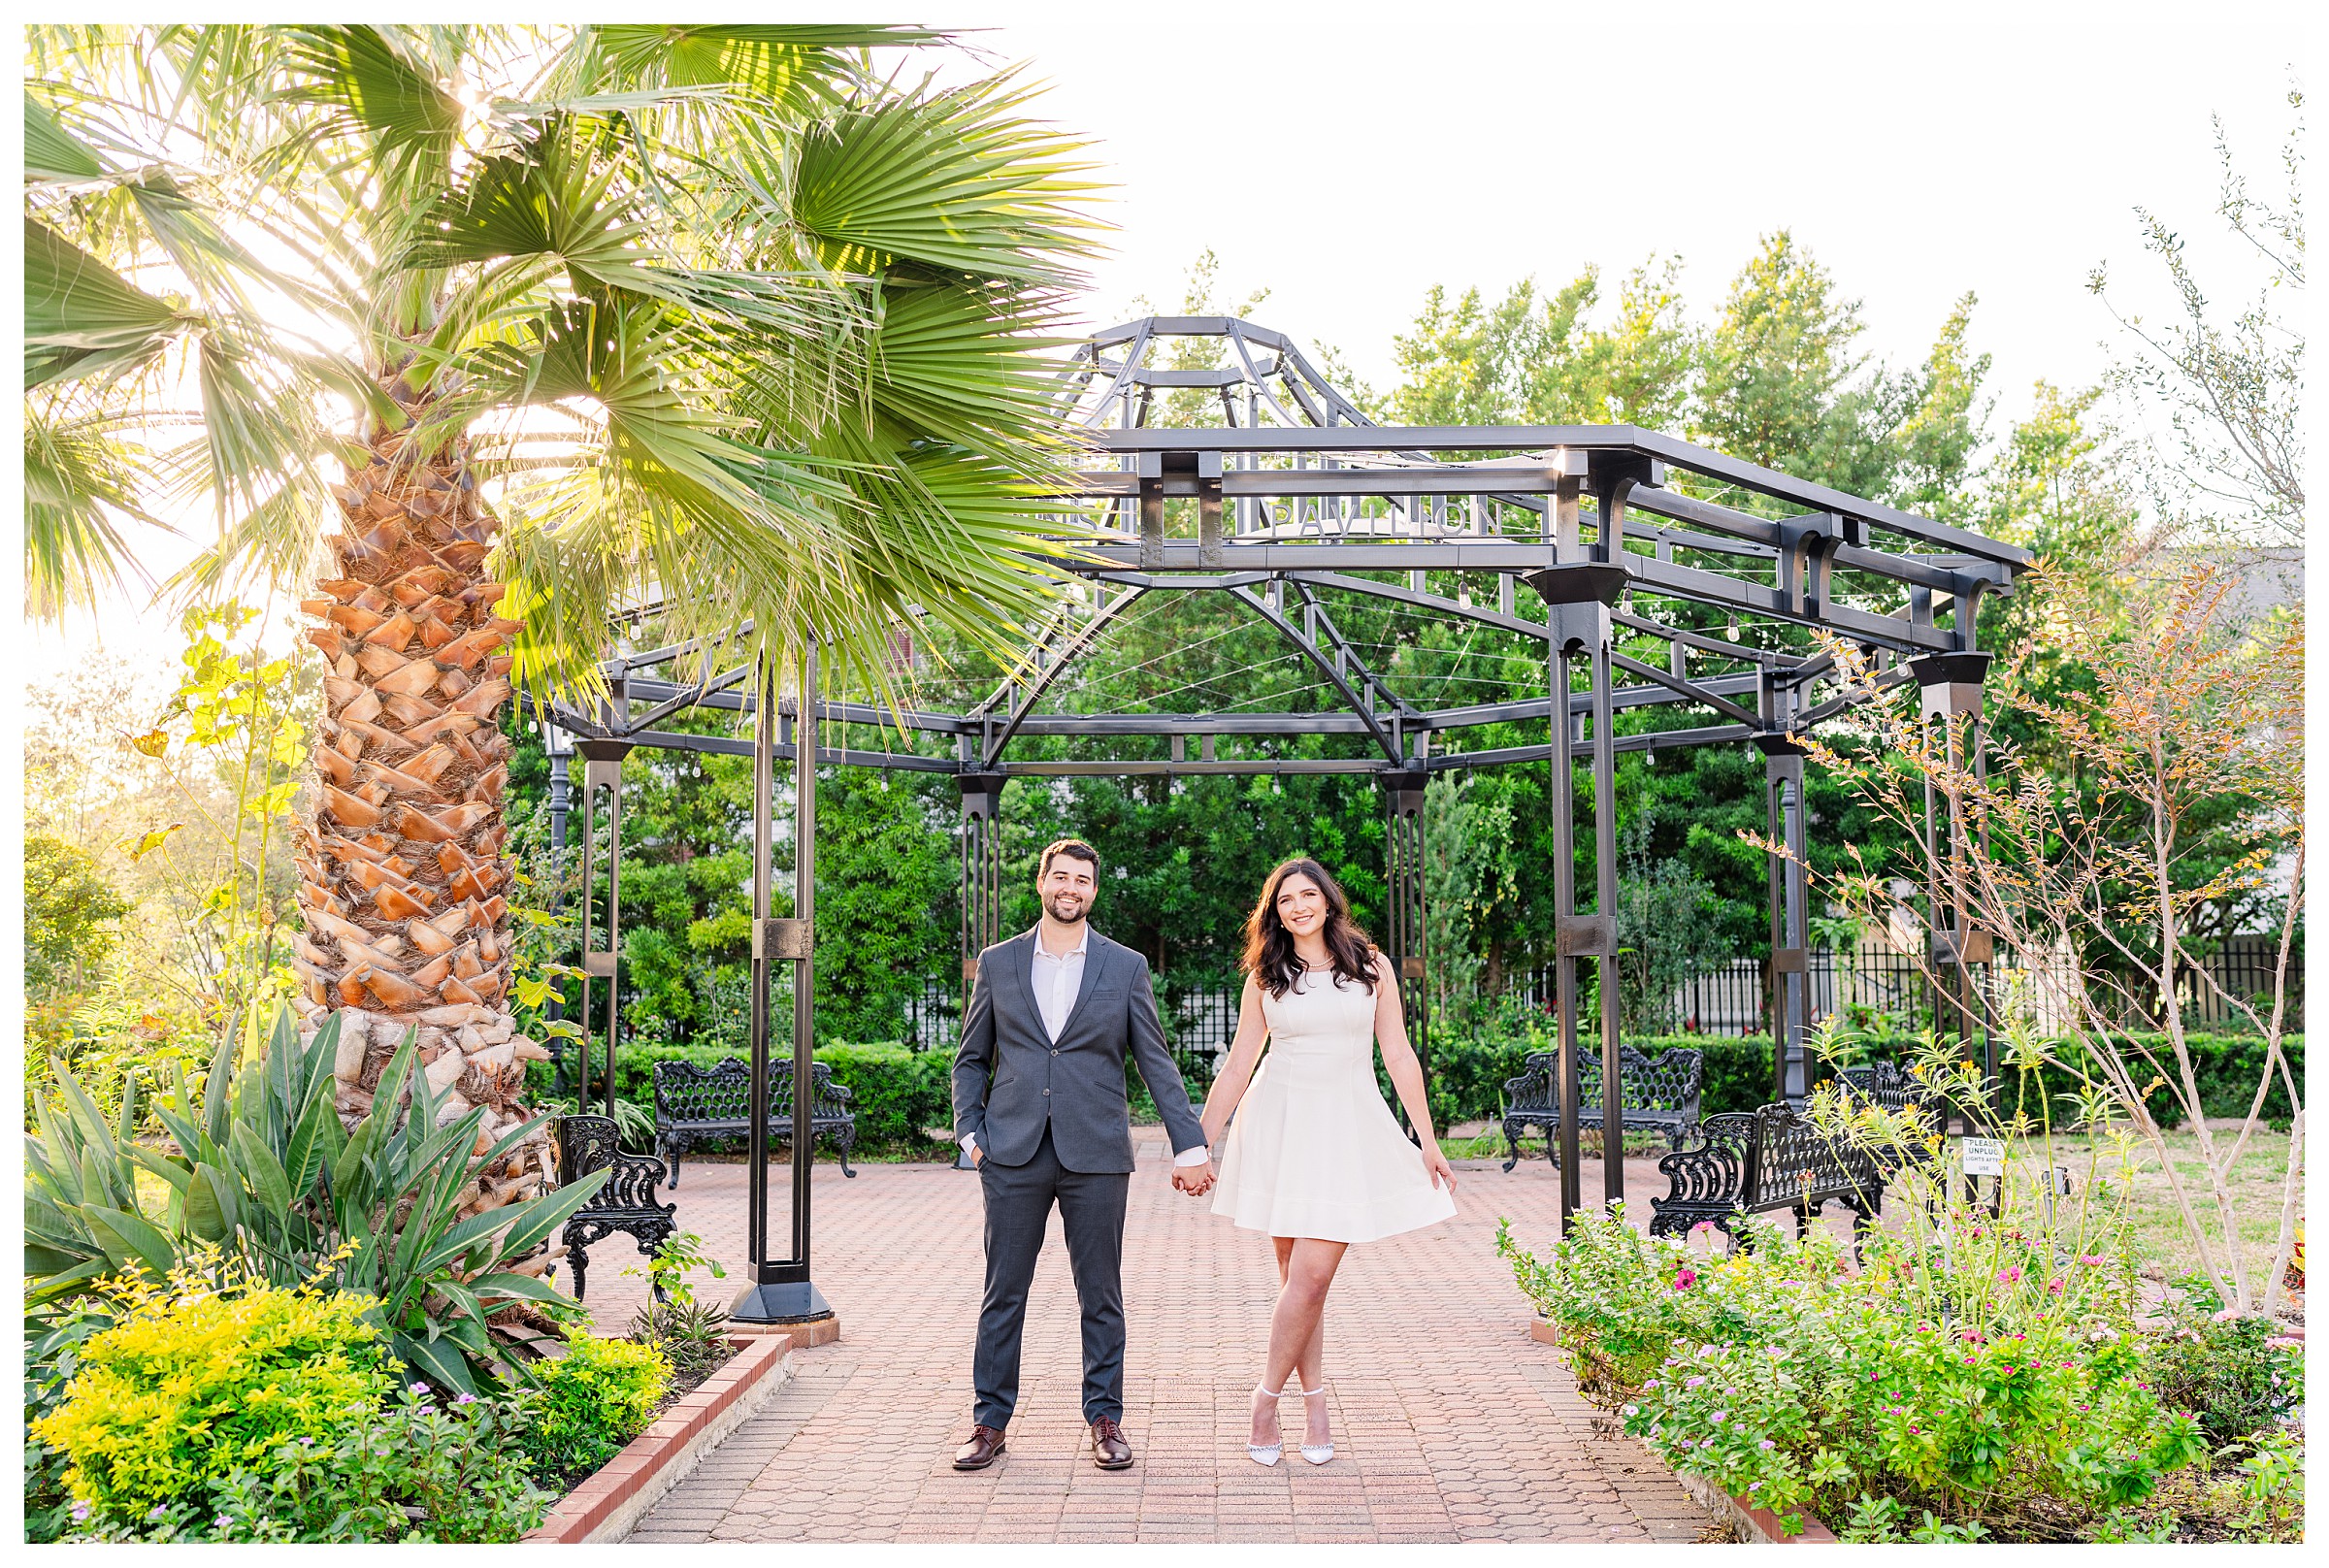 Far away shot of couple standing facing camera while hand in hand and smiling while guy is wearing a dark blue suit and girl is wearing white cocktail length dress with heels in a nature filled park and black iron structures in Galveston, Texas.